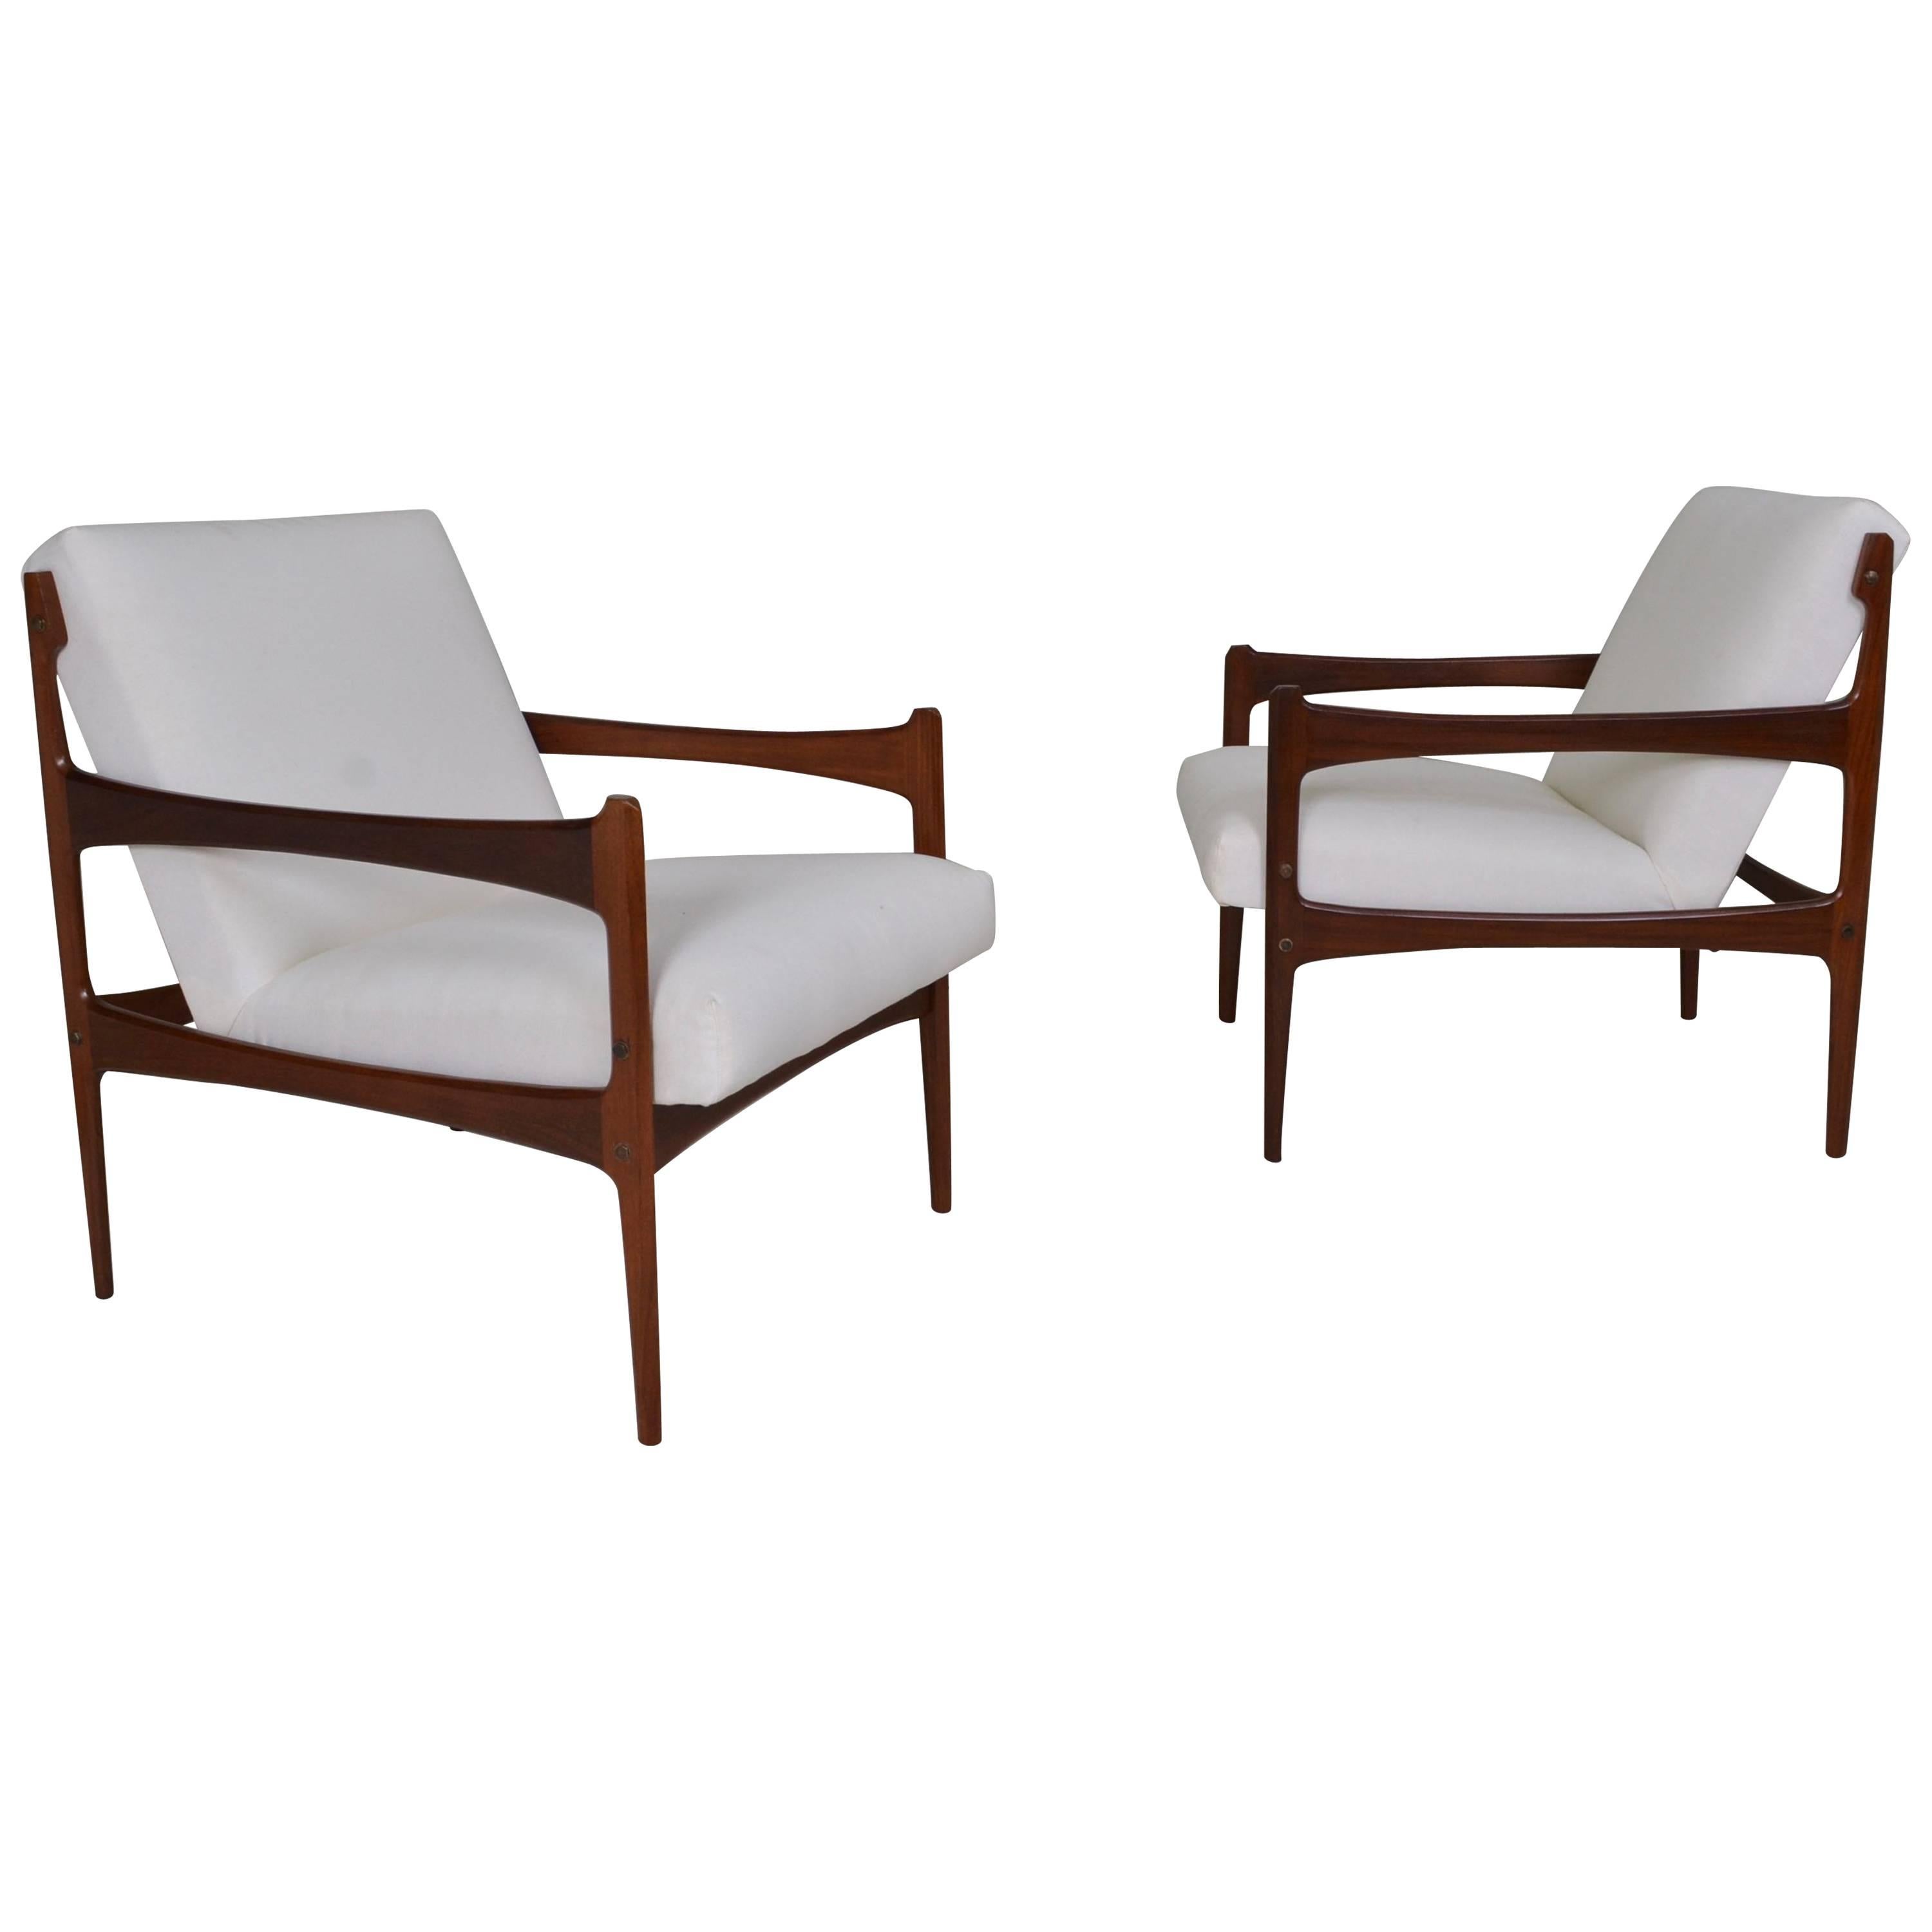 Architectural Pair of Armchairs, Italy, circa 1950 For Sale